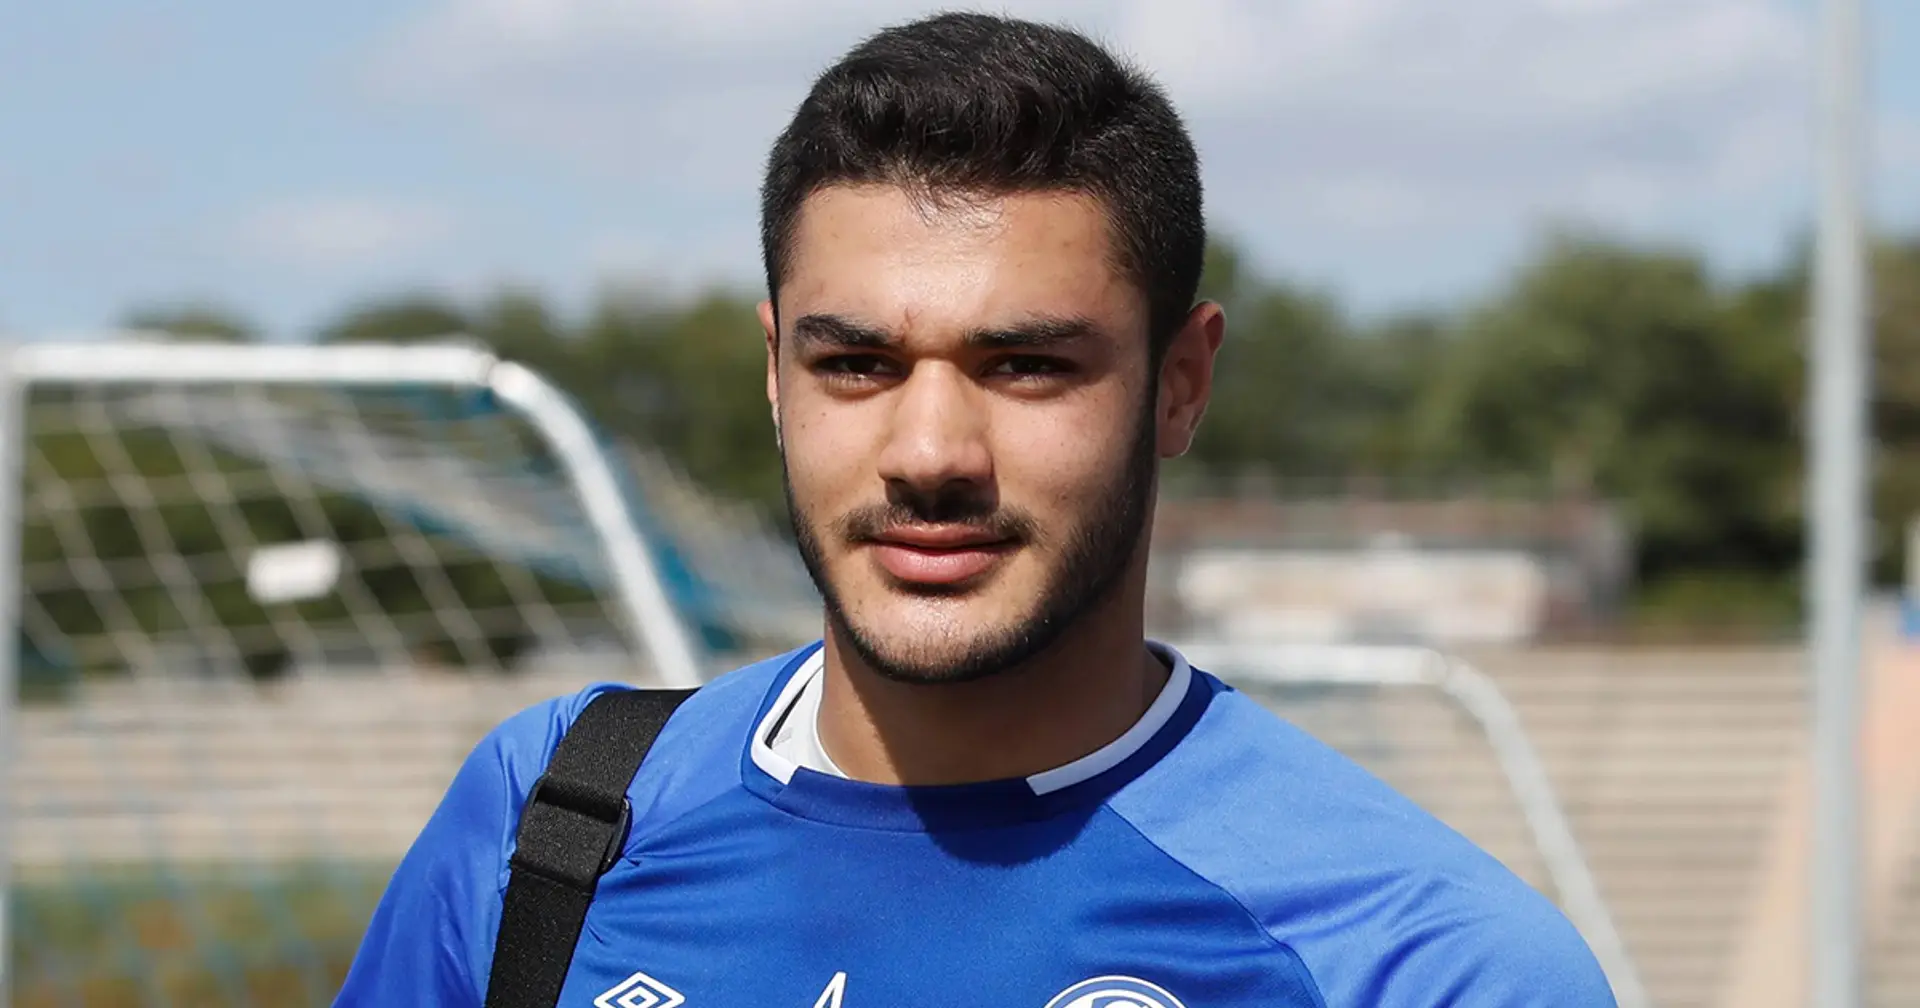 Liverpool reportedly contact Schalke about €25m-rated Ozan Kabak (reliability: 4 stars)